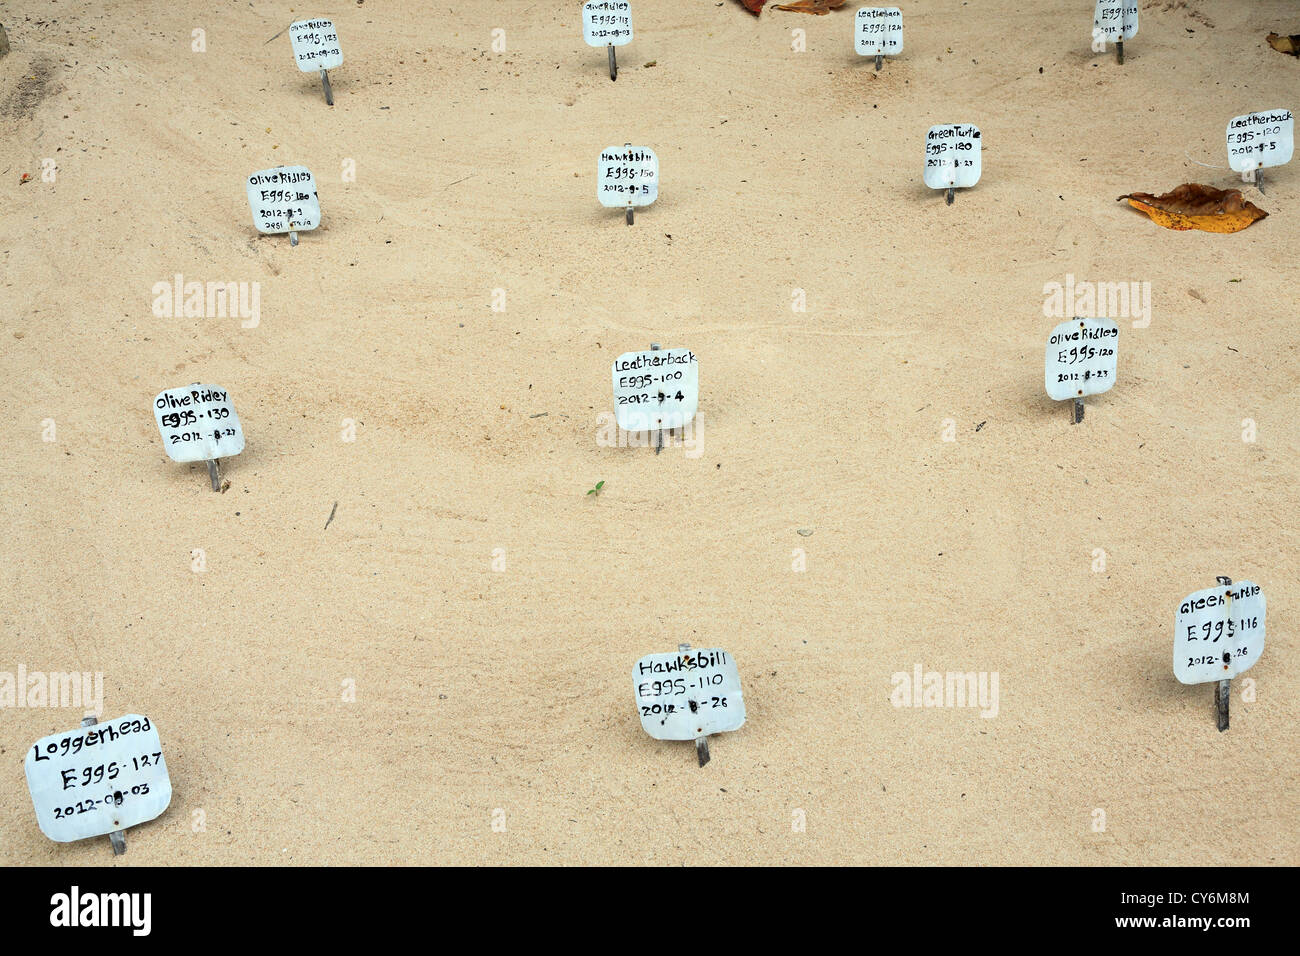 Pegs in the sand marking different species of turtle eggs in incubation at Koggala Habaraduwa turtle hatchery in Sri Lanka Stock Photo